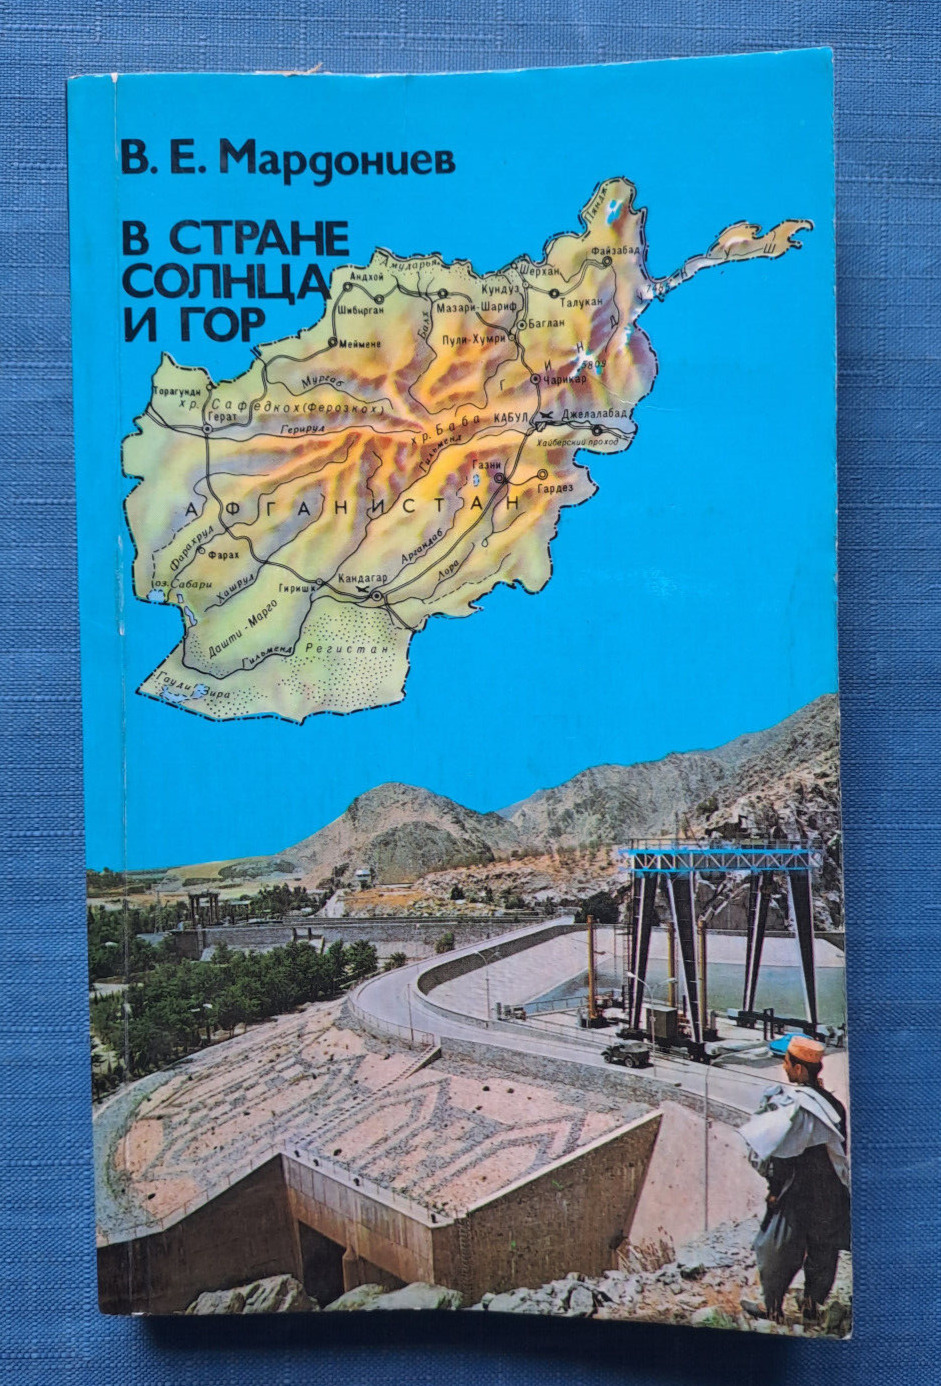 1980 Afghanistan In the land of sun and mountains Photo essay Russian book